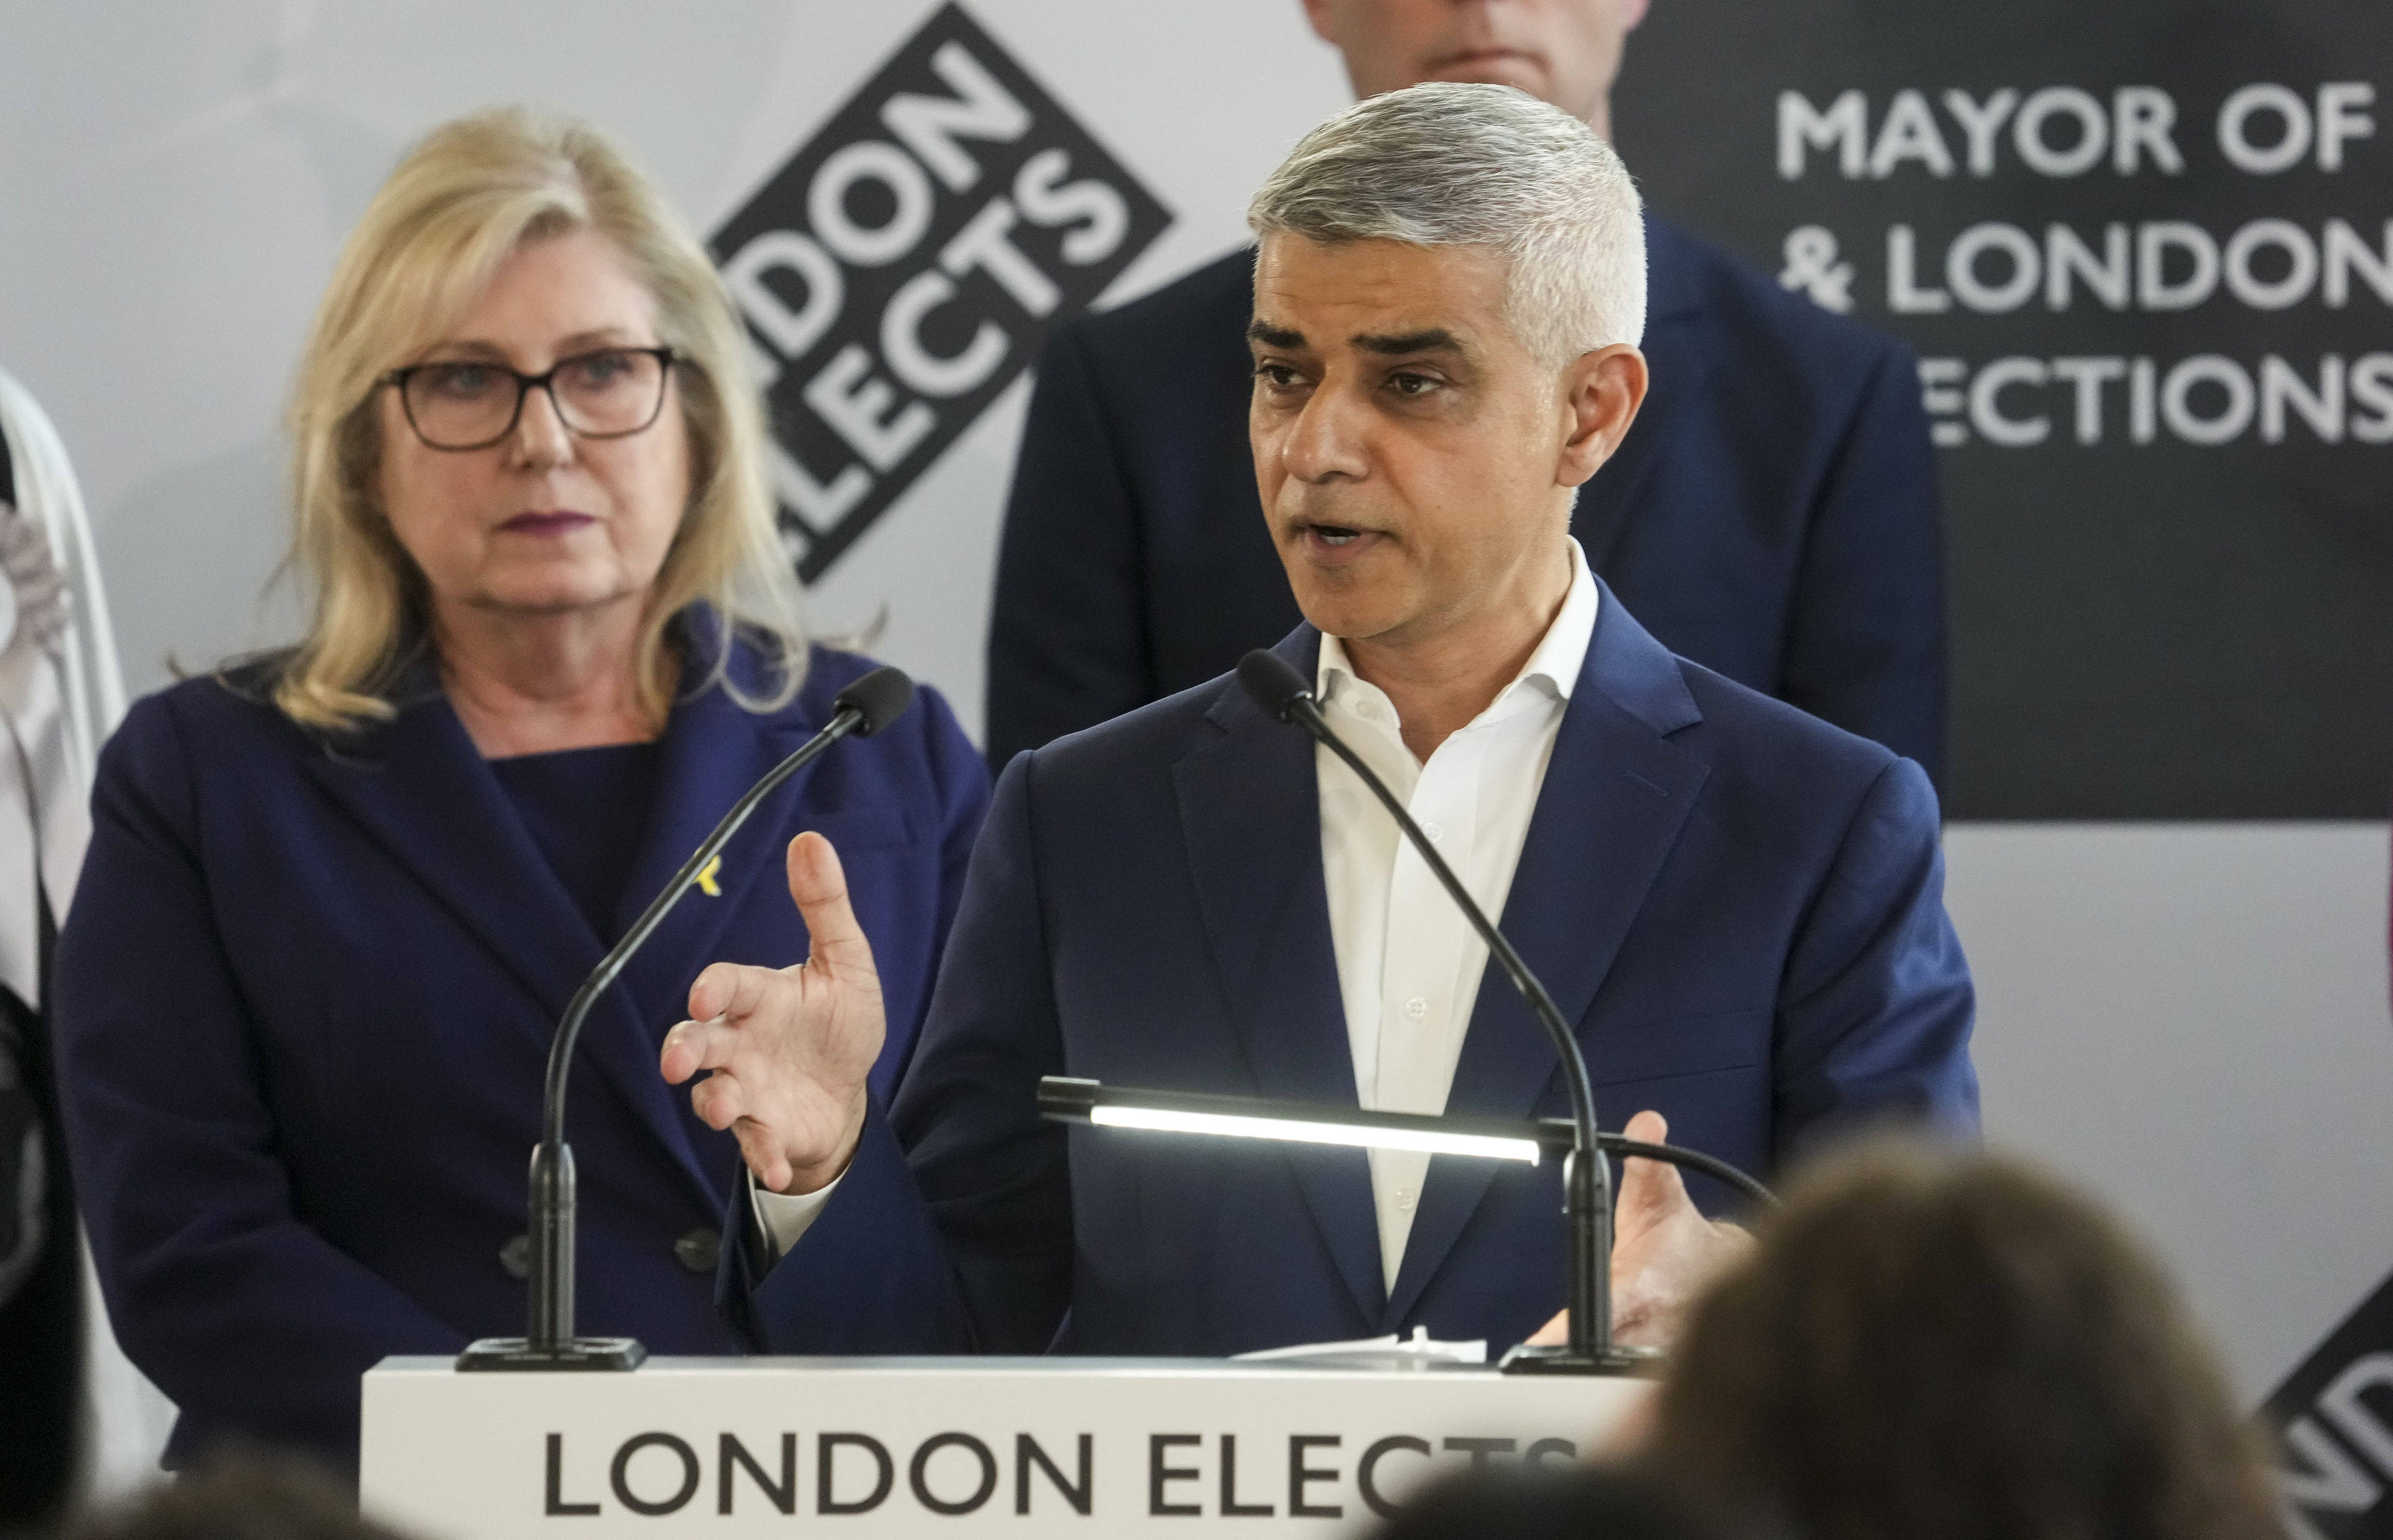 Labour’s Sadiq Khan speaks at City Hall after he is re-elected as the Mayor of London on Saturday. Photo: PA via AP